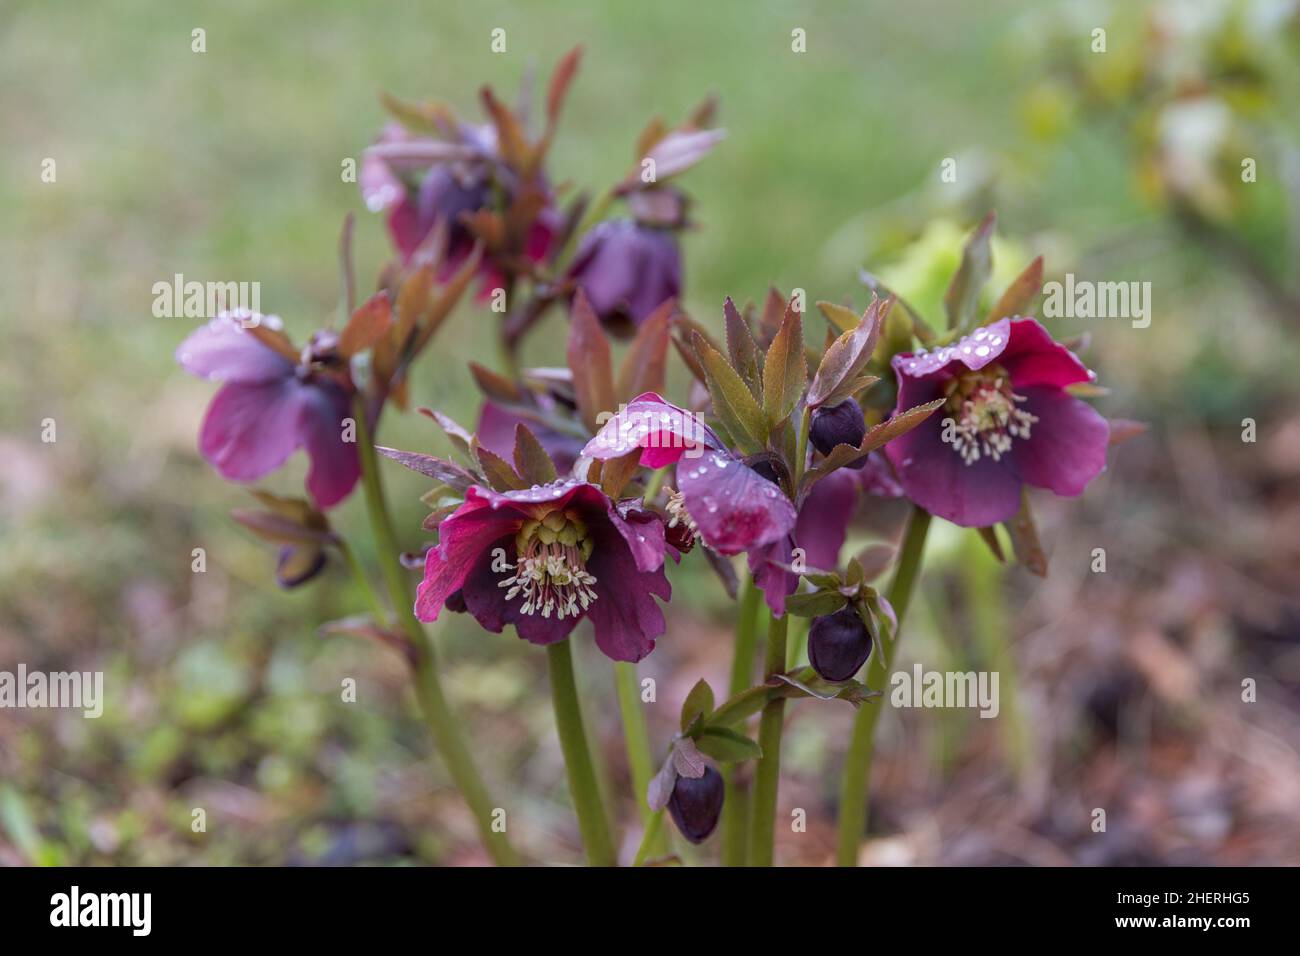 Blooming flowers hellebore in a sunny day, also known as Christmas or Lenten rose. Helleborus Double Ellen Purple. Stock Photo